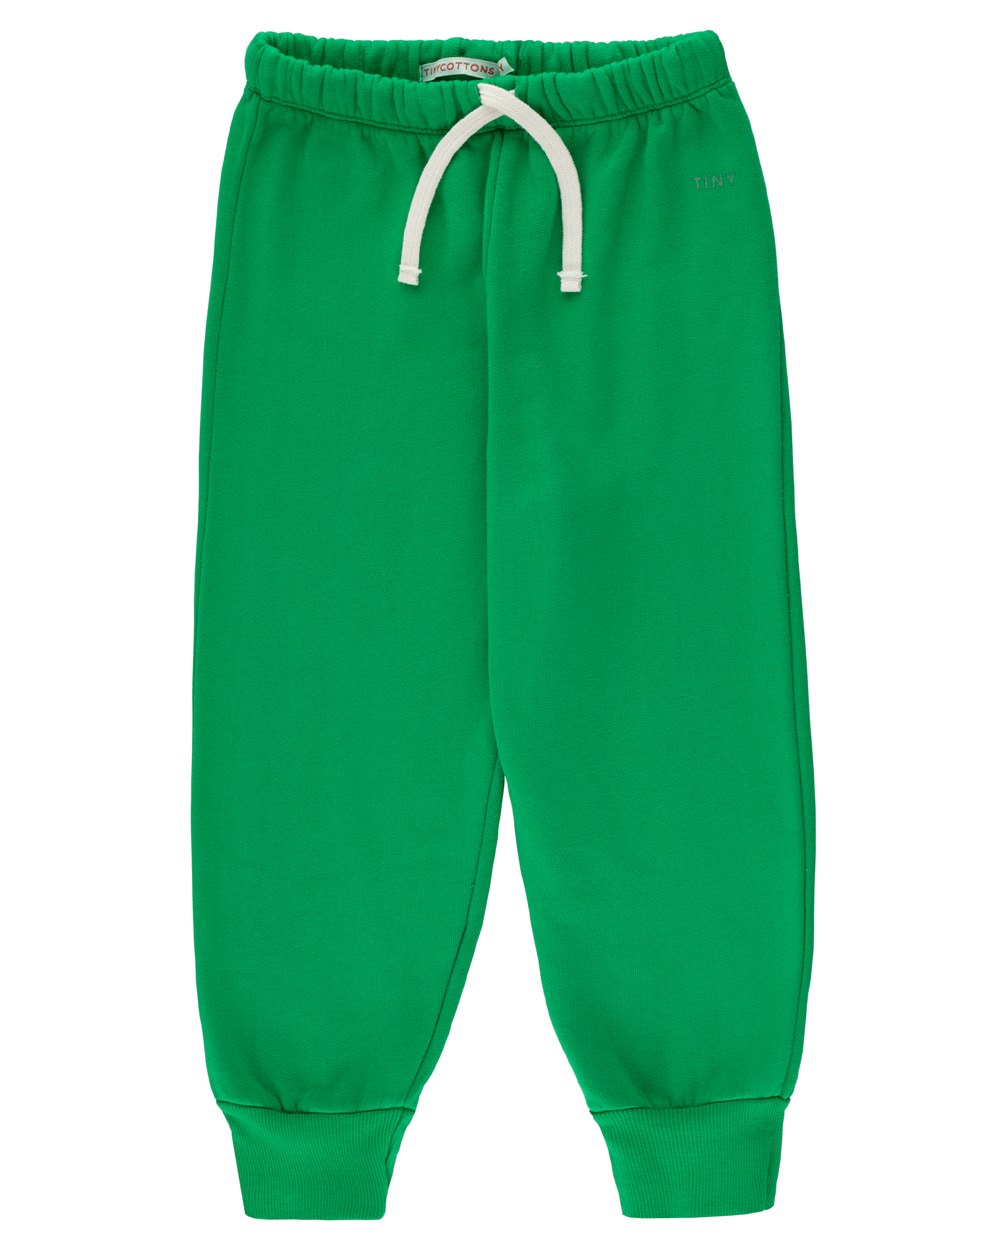 [TINY COTTONS]TINY SWEATPANT /grass green [4Y,8Y]